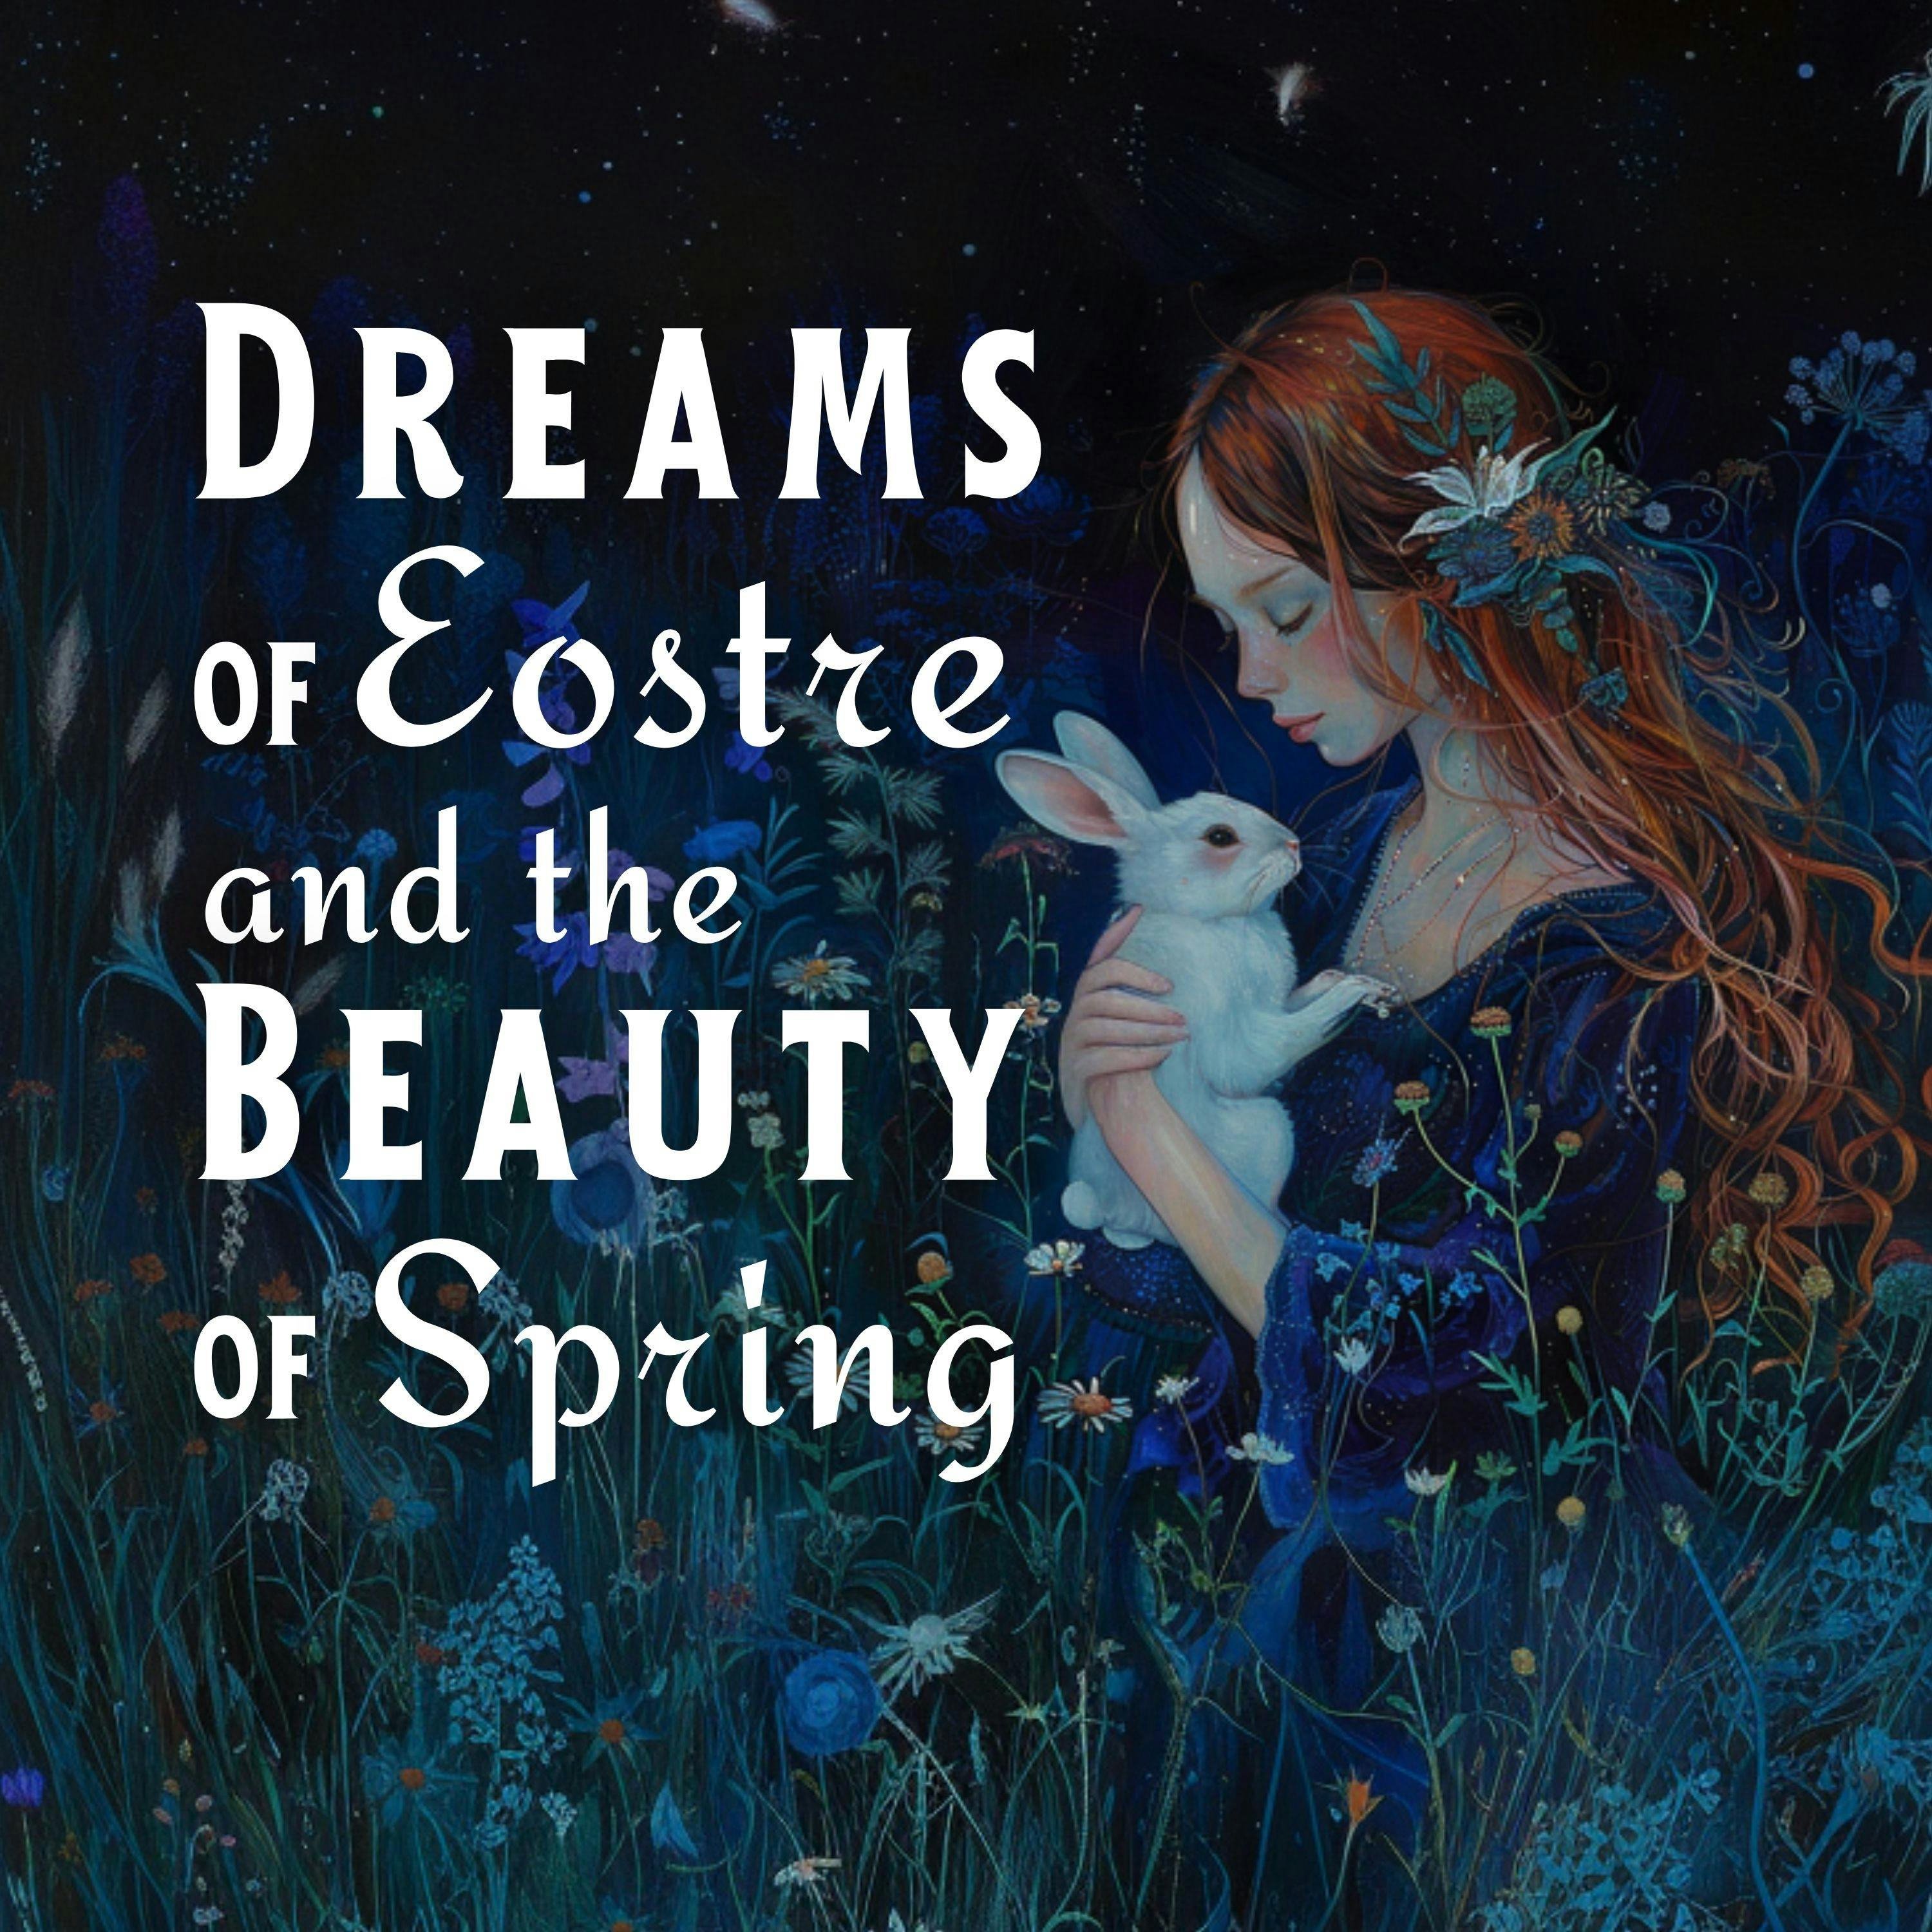 Dreams of Eostre and the Beauty of Spring